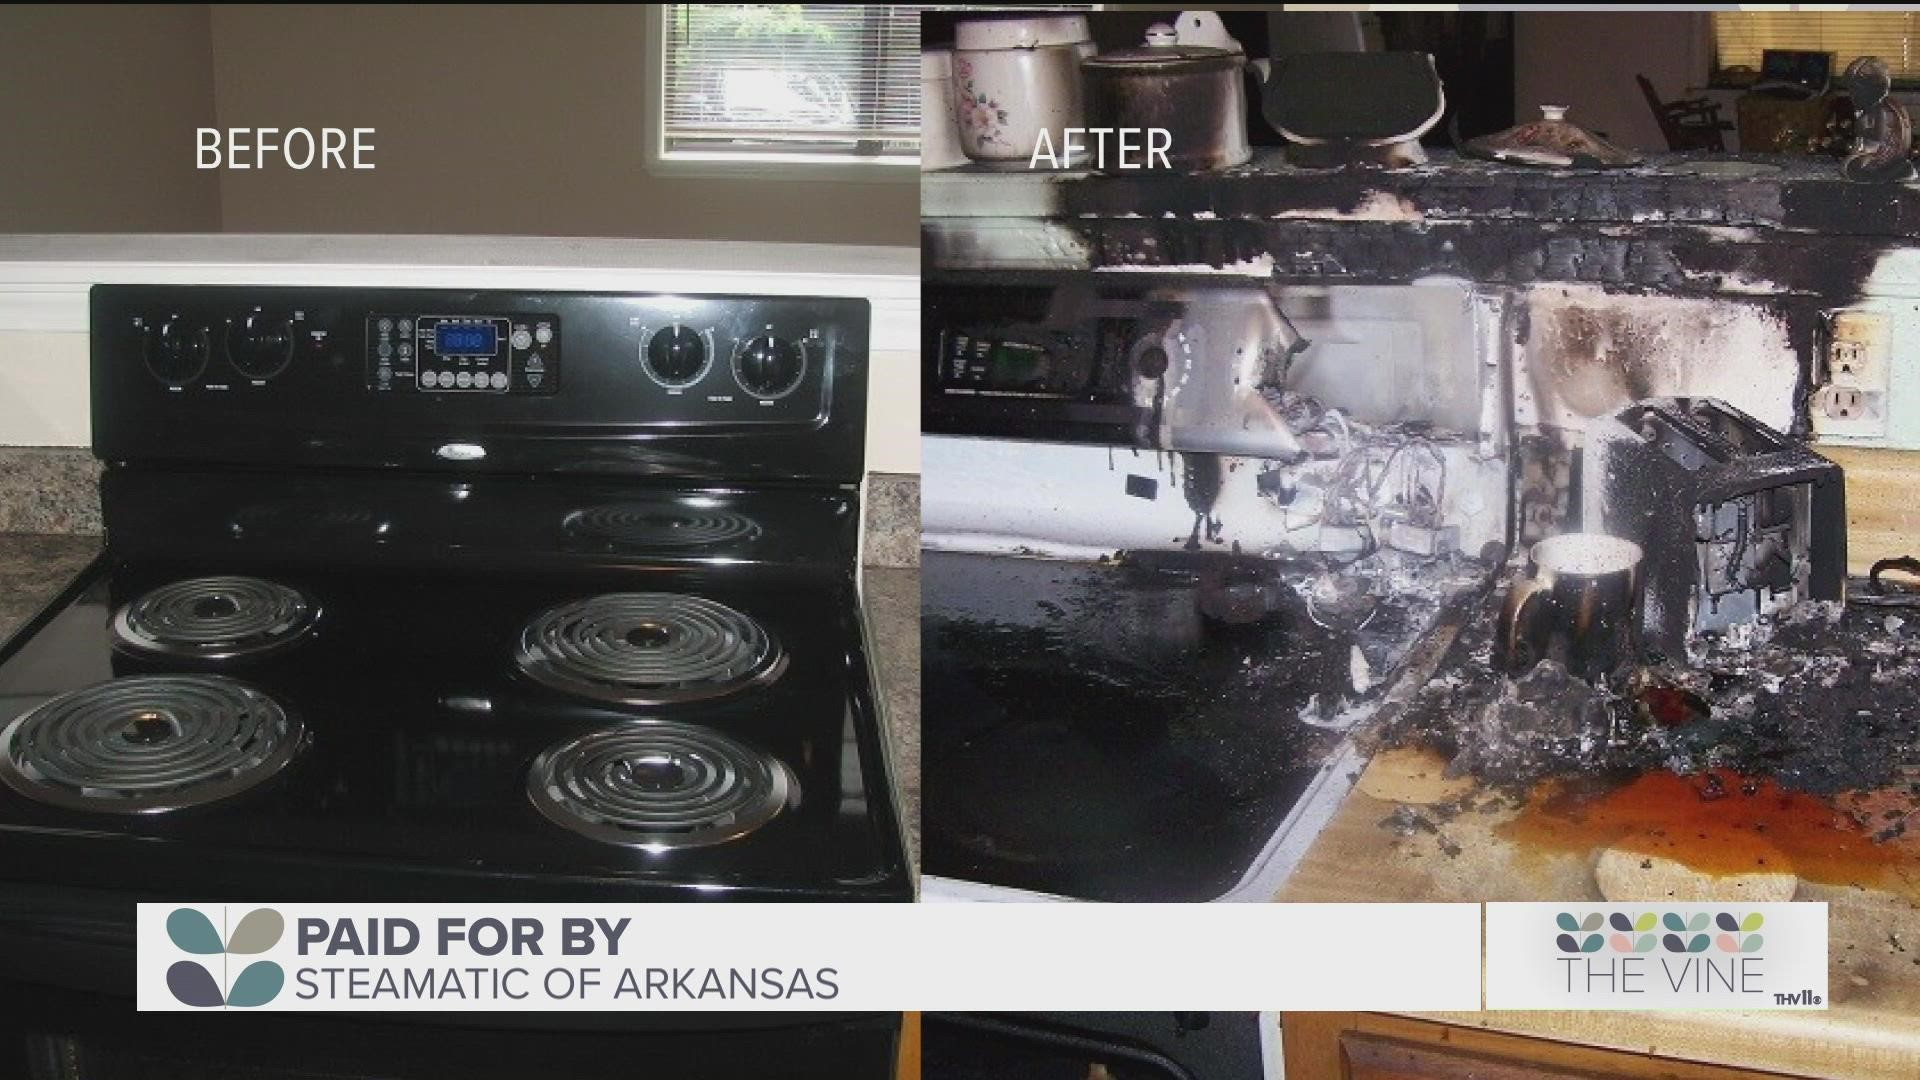 October is Fire Prevention Month, and Misty Poole with Steamatic of Arkansas shares a few ways to protect your home against fire to keep you and your family safe.